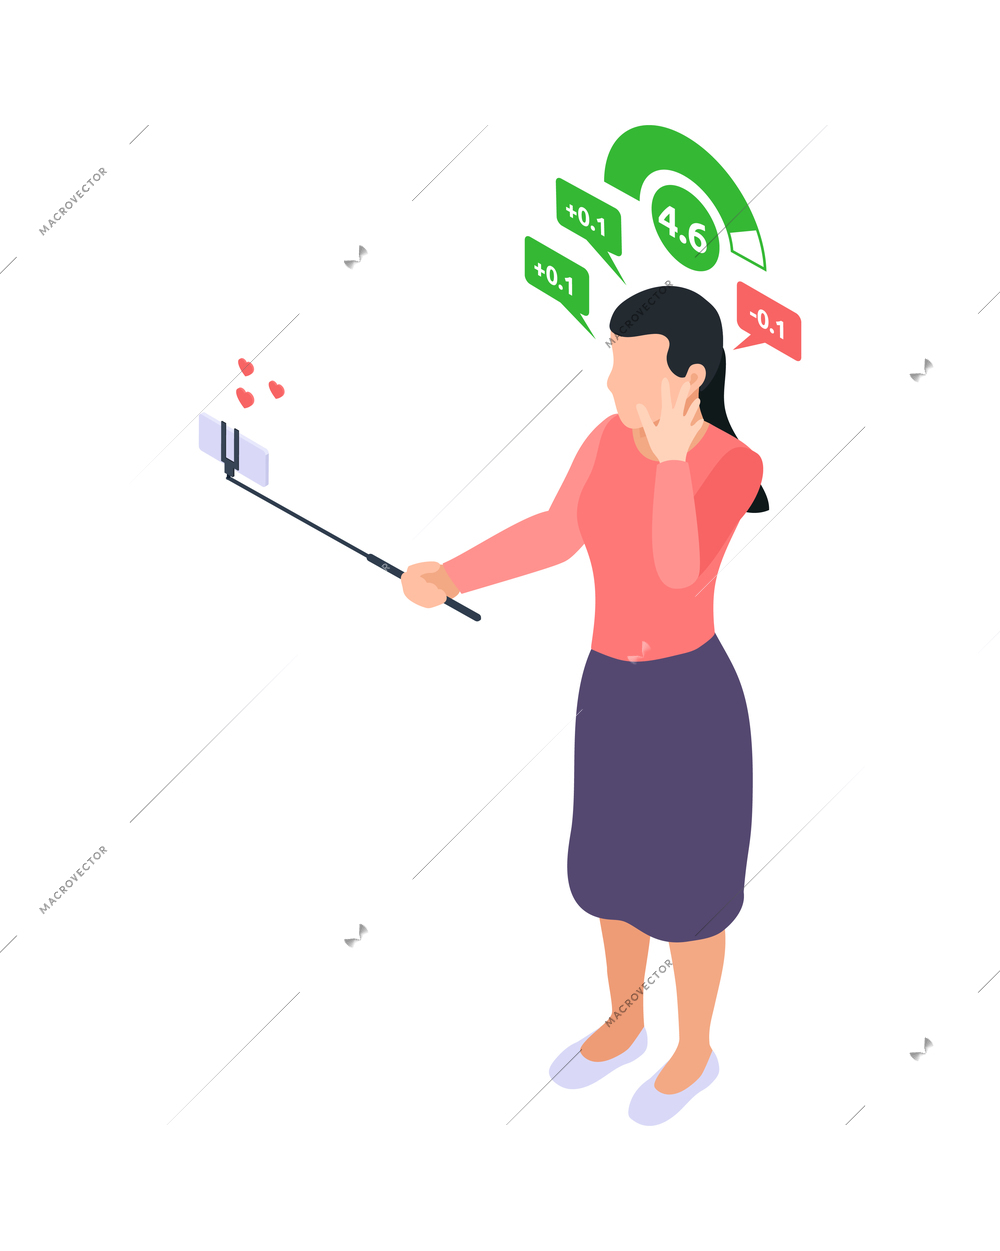 Social credit score system isometric composition with human characters rating pictograms and profile vector illustration